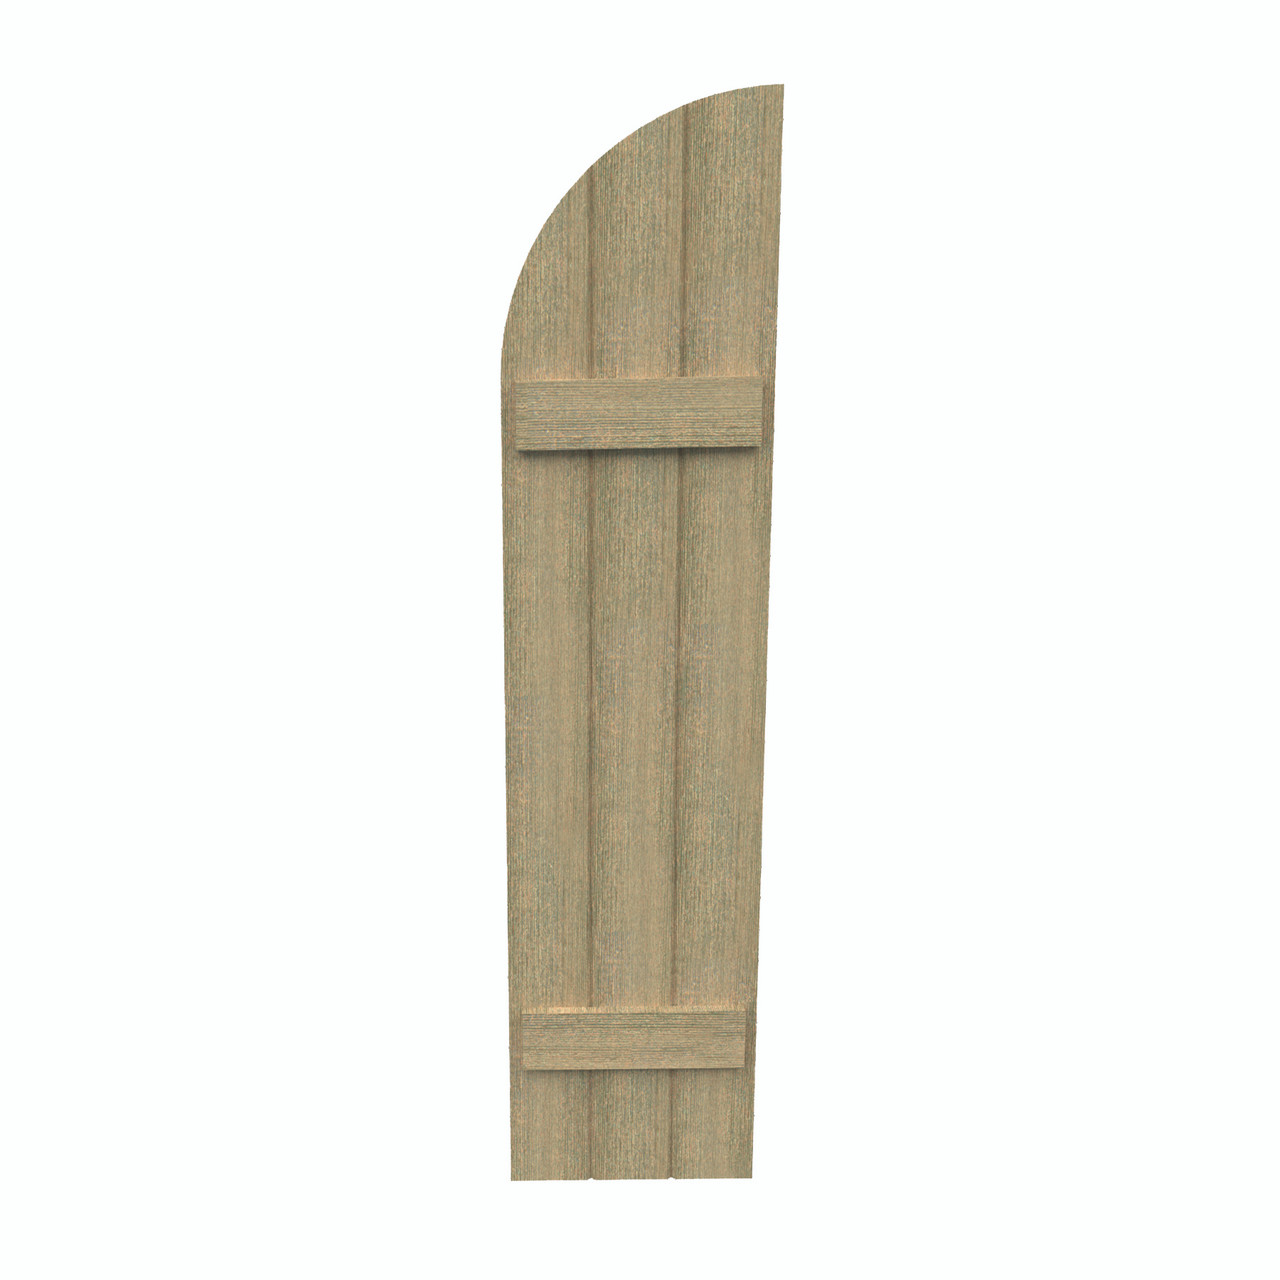 18 inch by 100 inch Quarter Round Shutter with 3-Boards